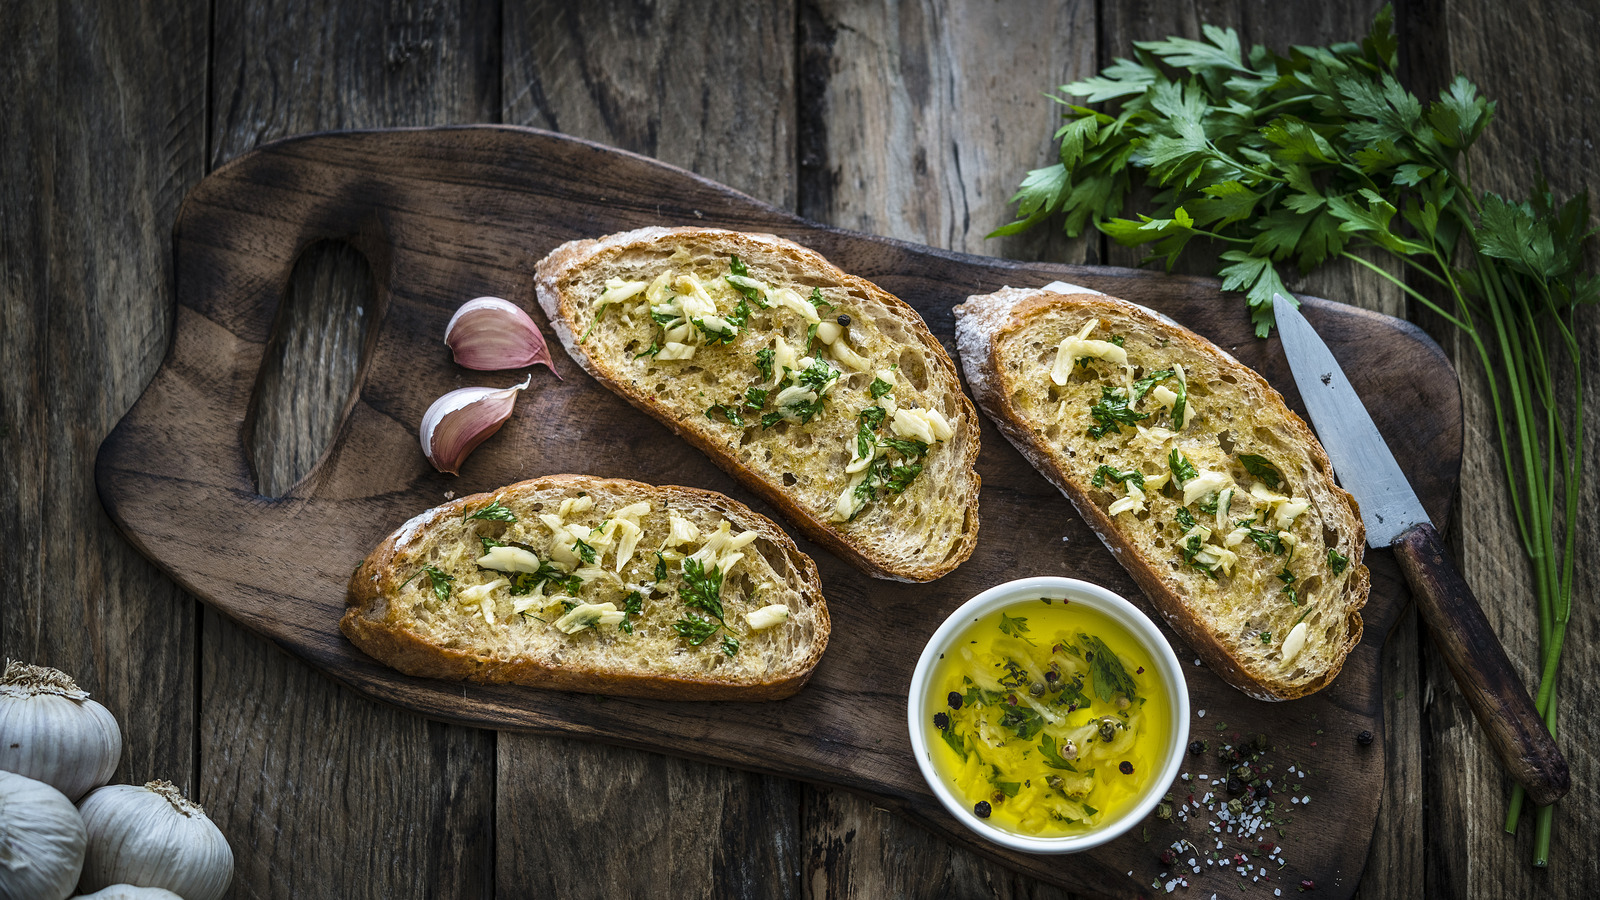 It's actually a mistake to use melted butter for garlic bread